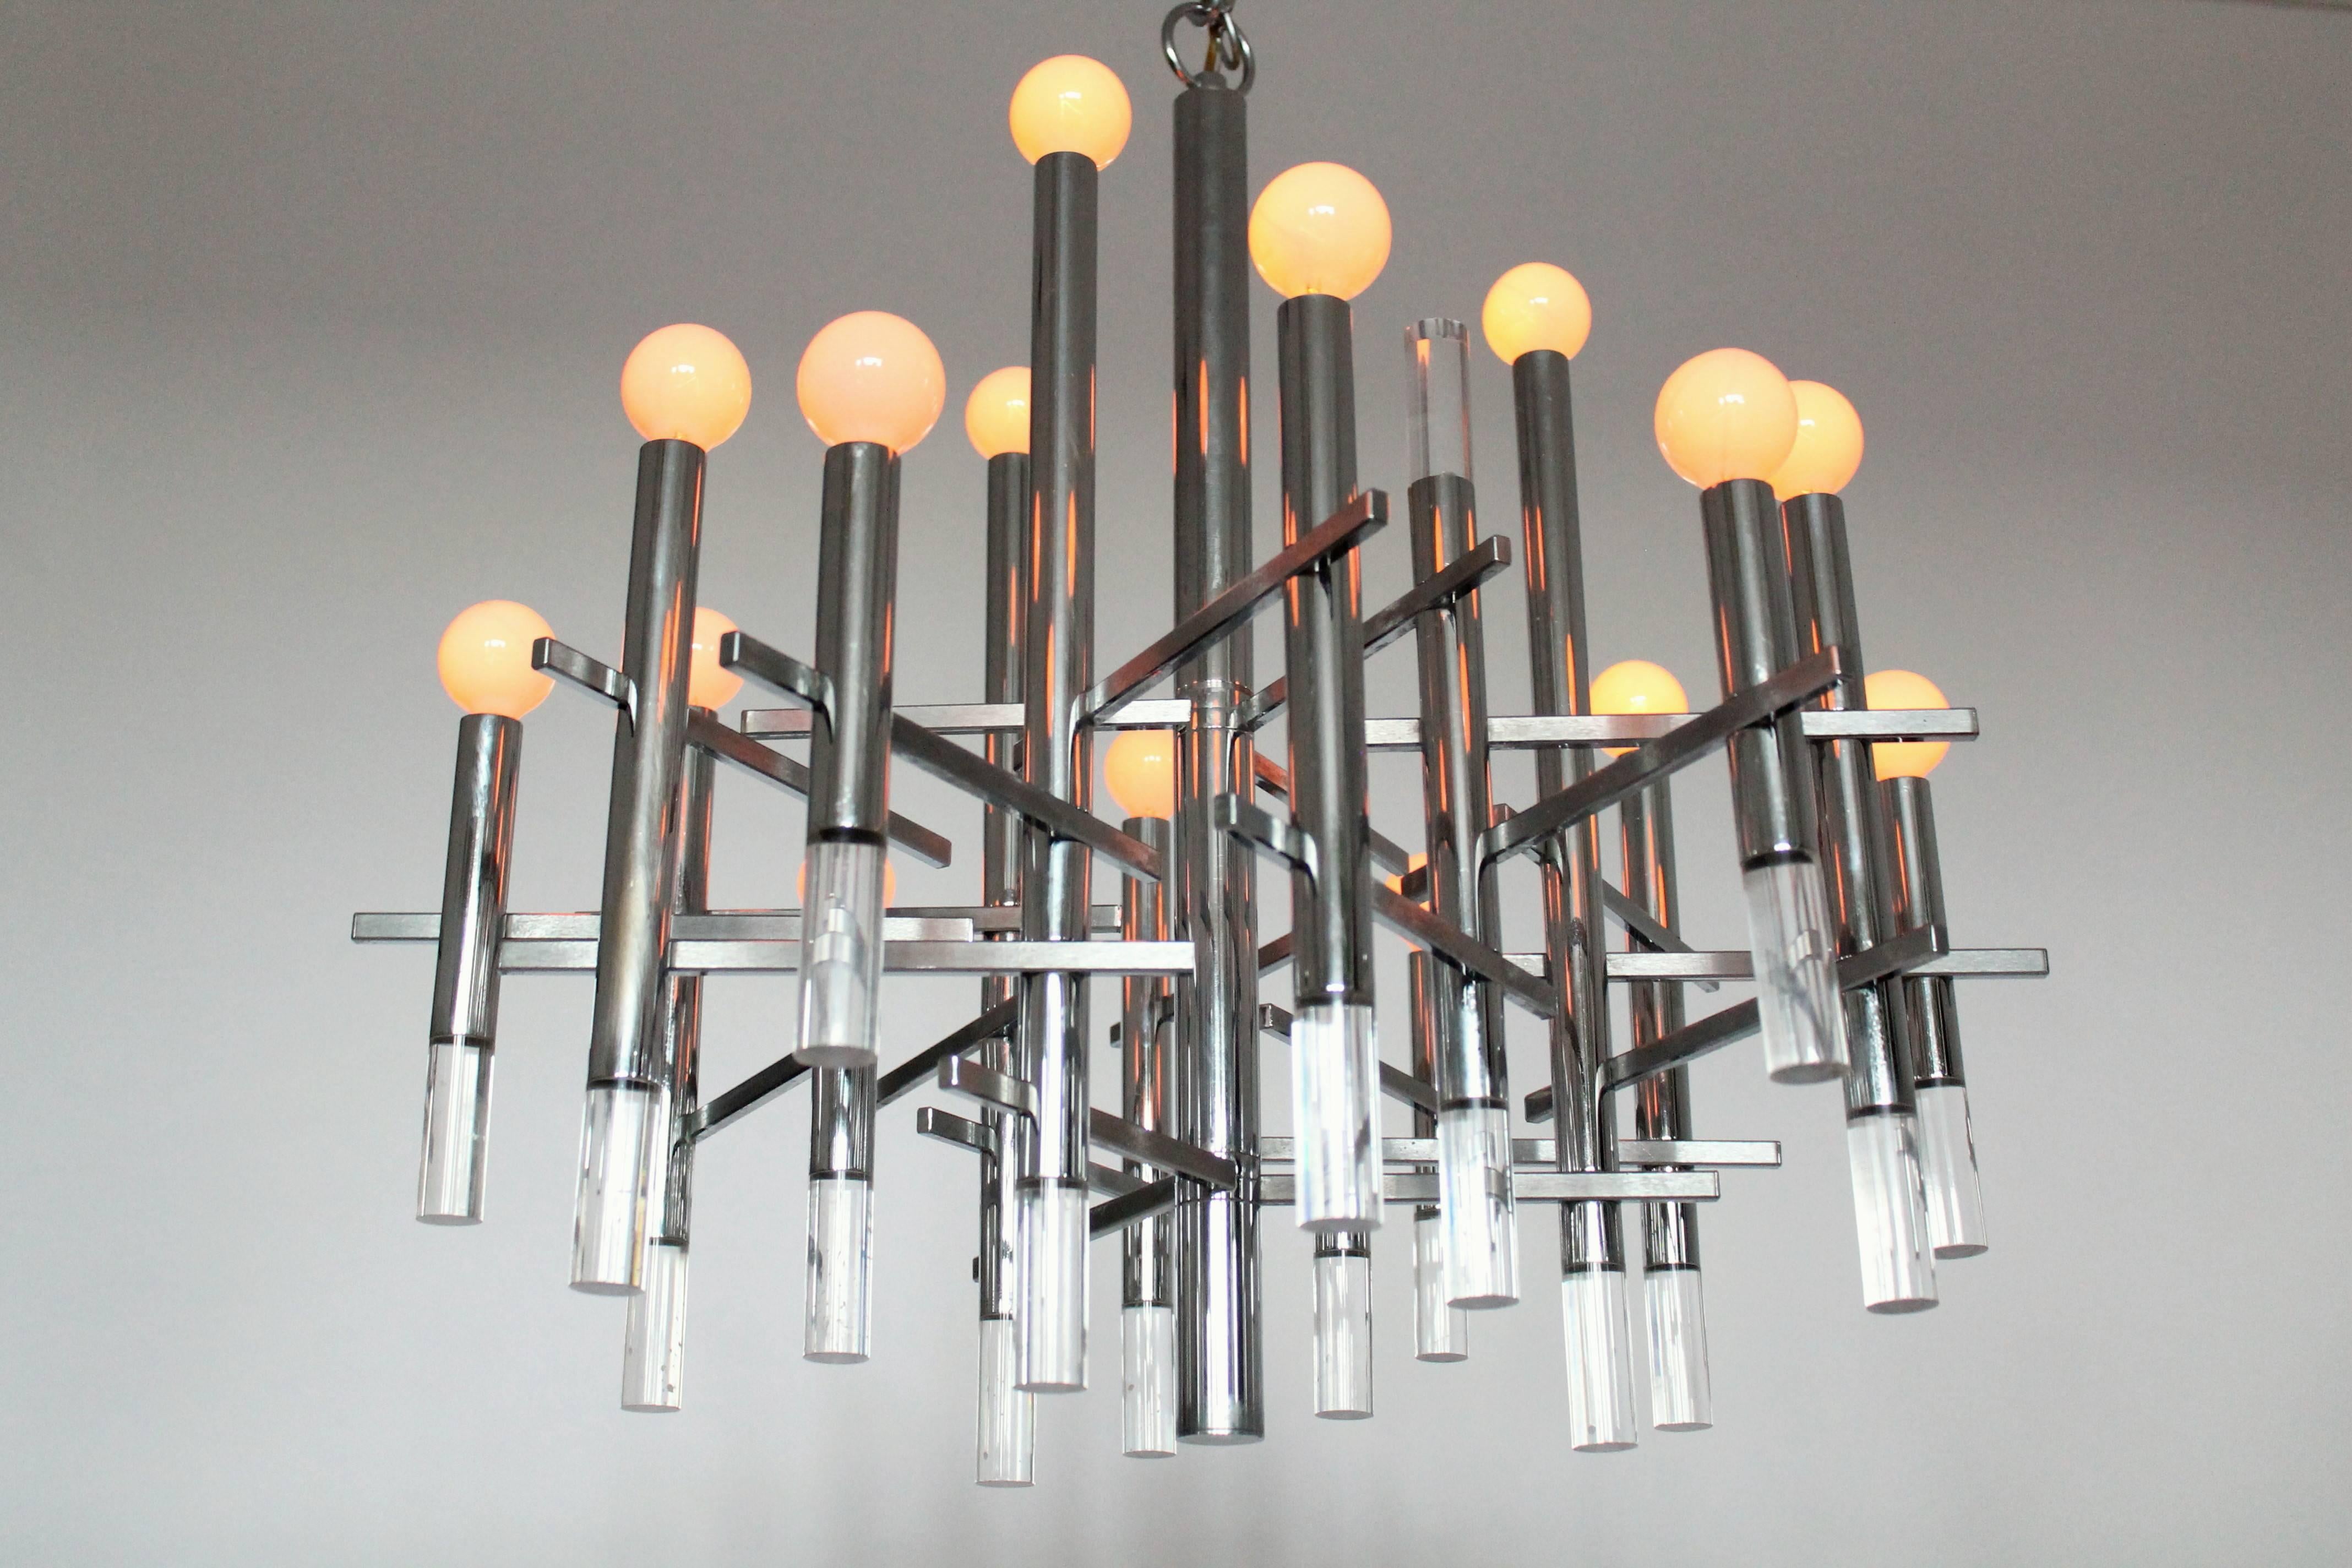 Made of prime quality material with a superb craftmanship and a solid sturdy construction . 

15 lights, 18 Lucite tips, 19 chromed stem provide a highly number of reflective surface area to have the light bounce everywhere and accent the beauty of